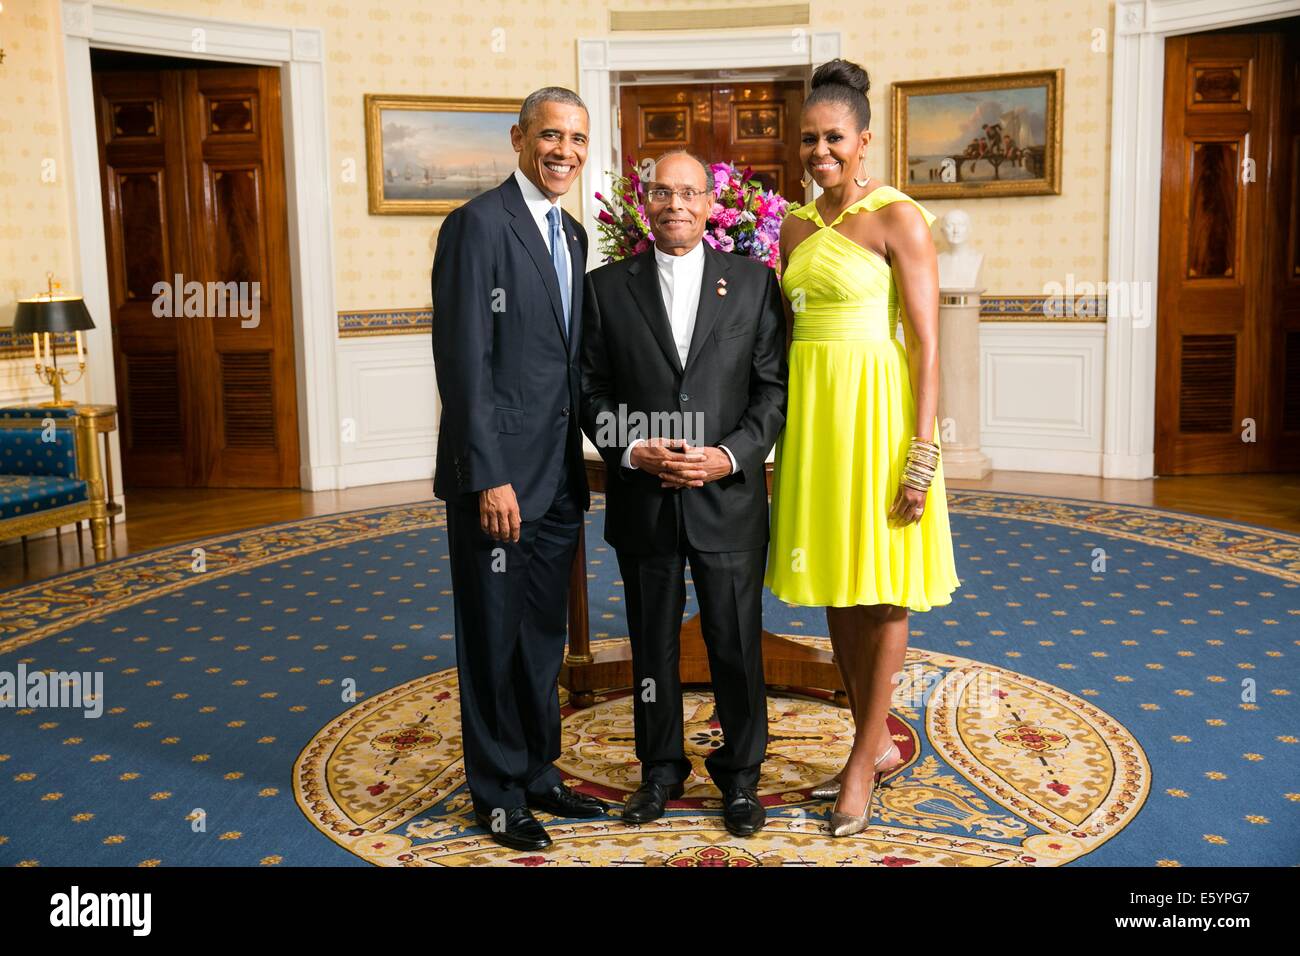 US President Barack Obama and First Lady Michelle Obama pose with Mohamed Moncef Marzouki, President of Tunisia, in the Blue Room of the White House before the U.S.-Africa Leaders Summit dinner August 5, 2014 in Washington, DC. Stock Photo